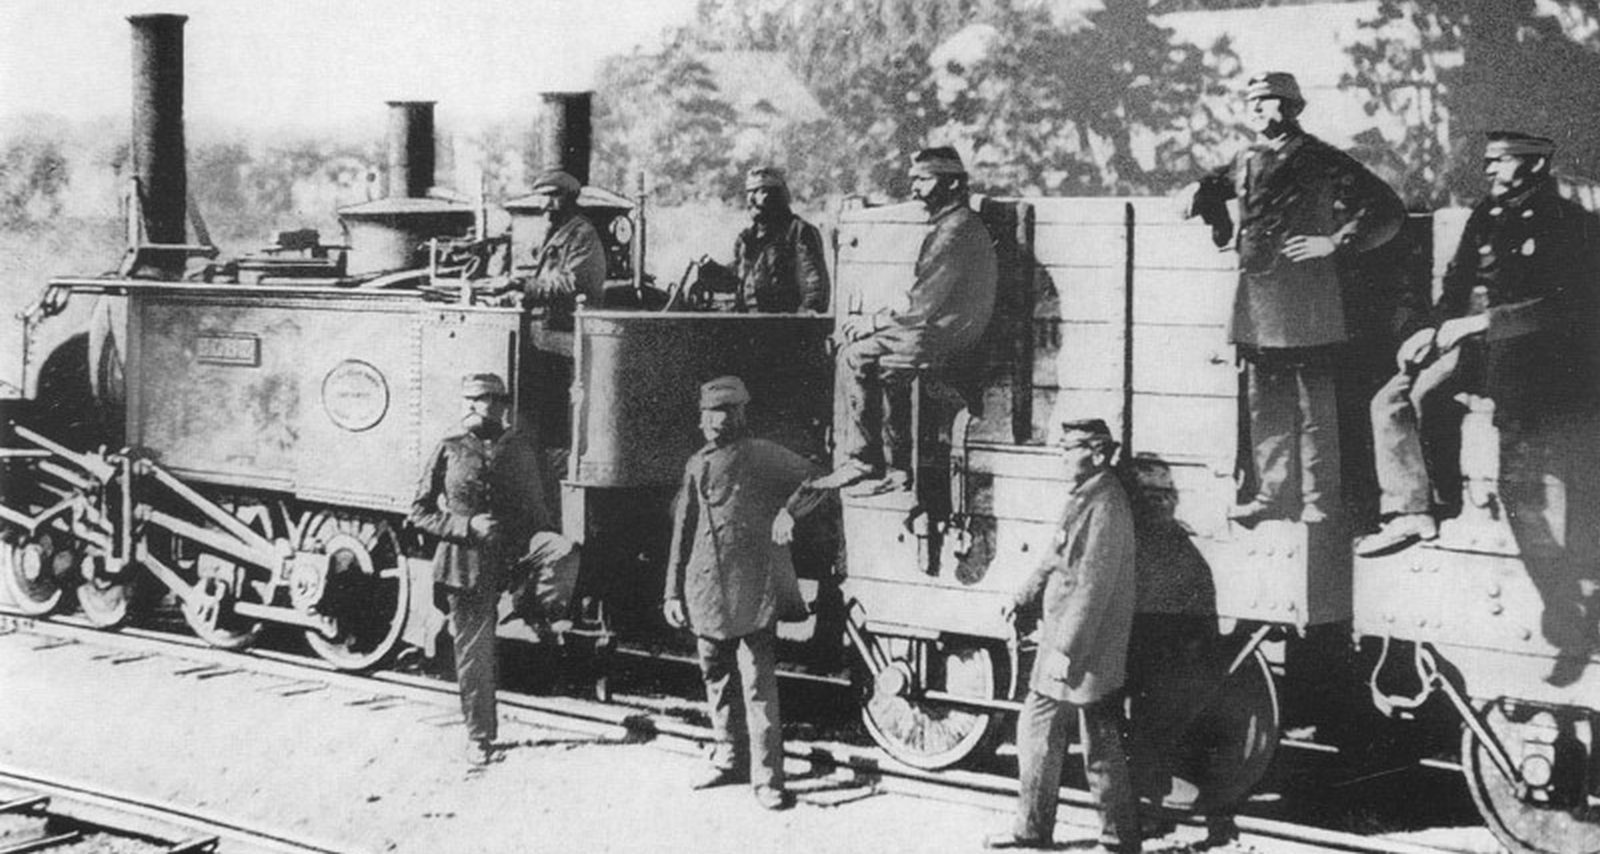 The “Elbe” 1867 with personnel and coal trucks